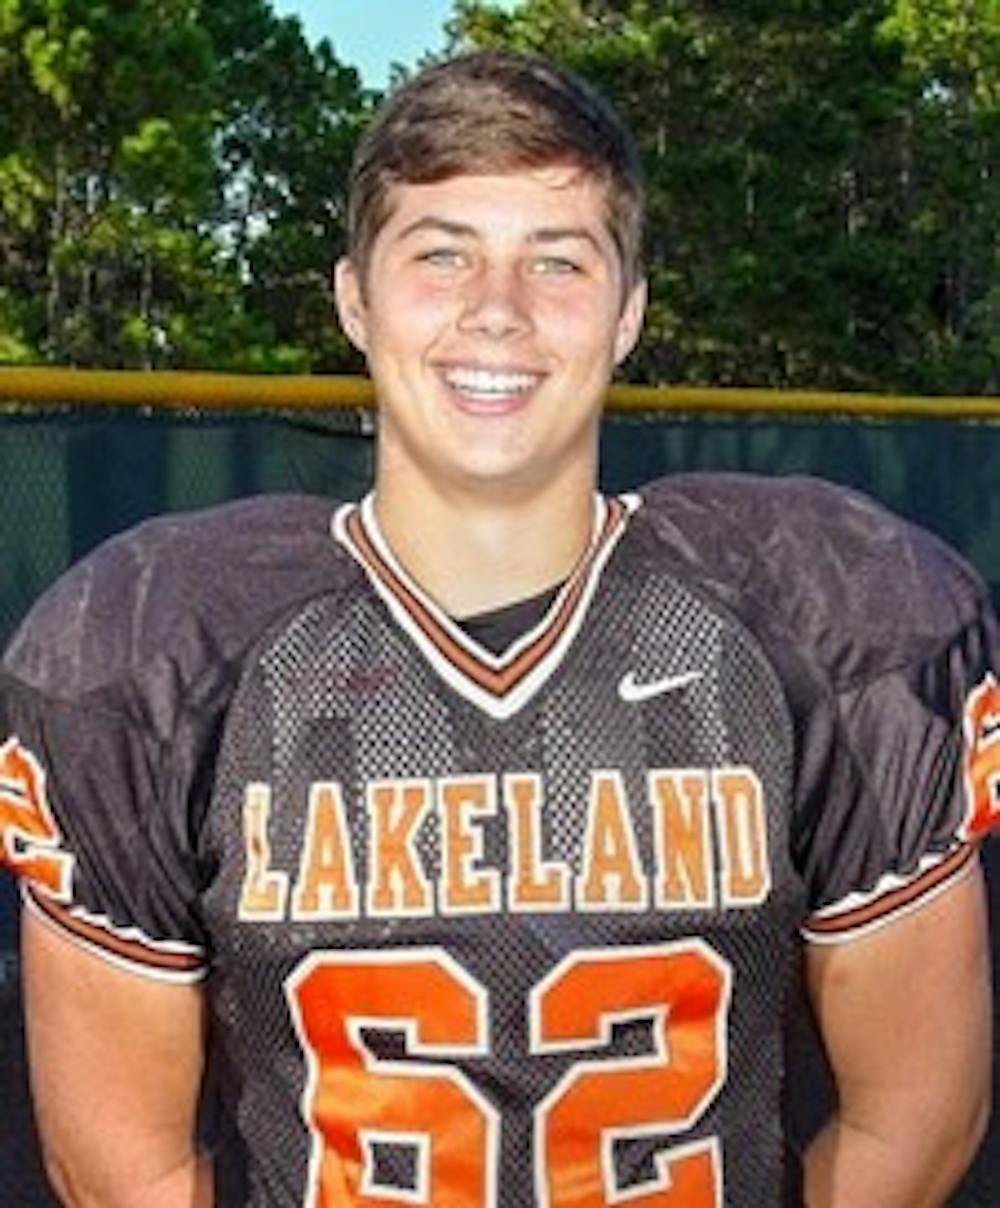 17-year-old Jake Flath joins Mercer's football team this Spring